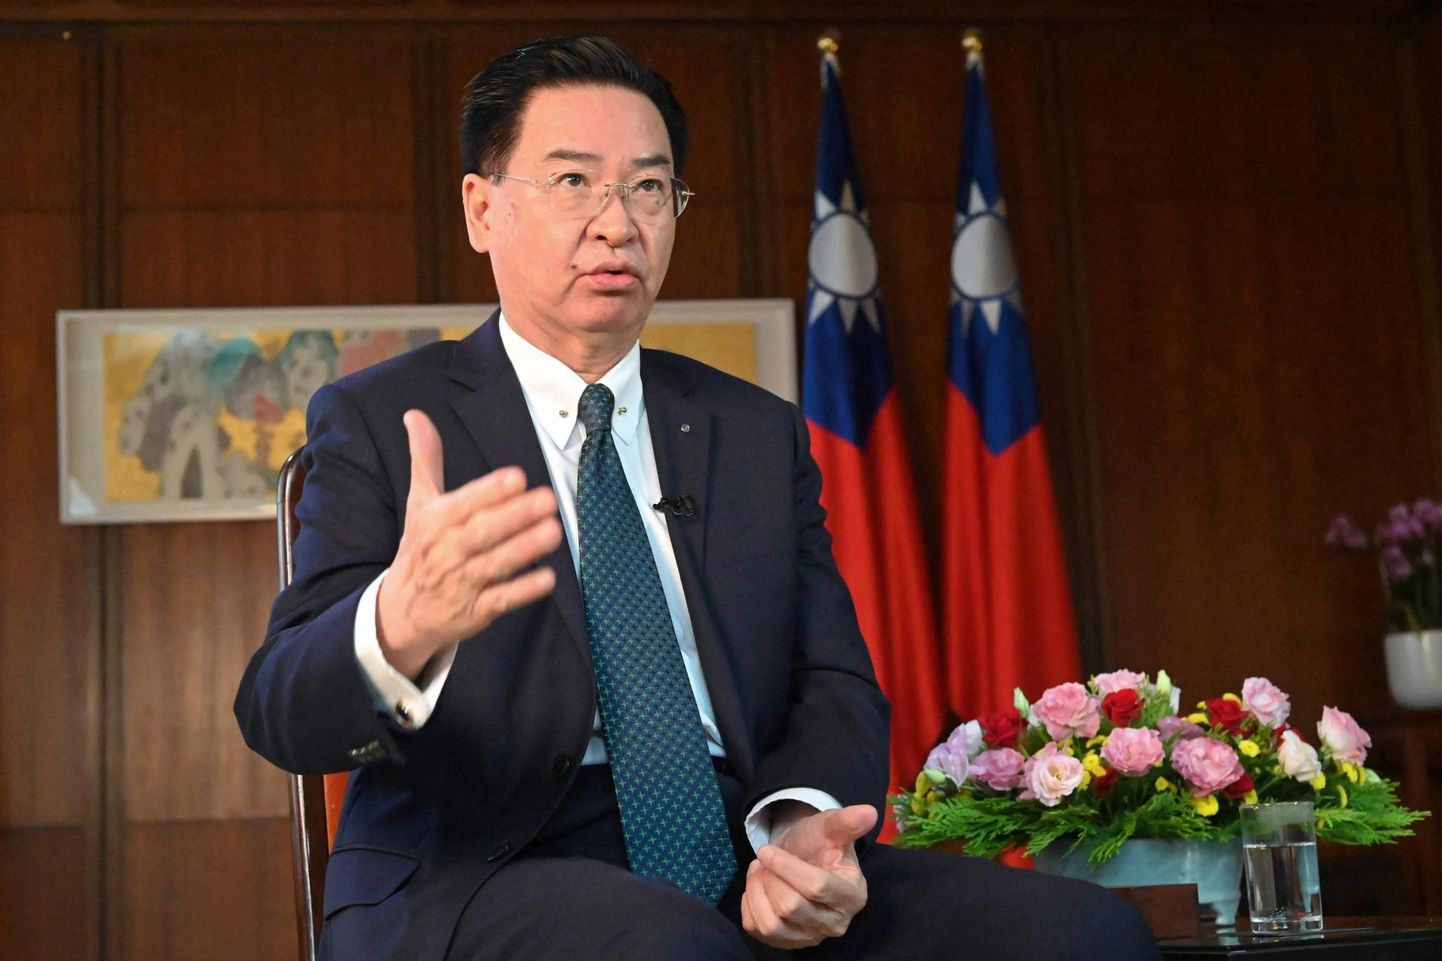 Members of the government will not meet with the Taiwanese foreign minister visiting Estonia next week.